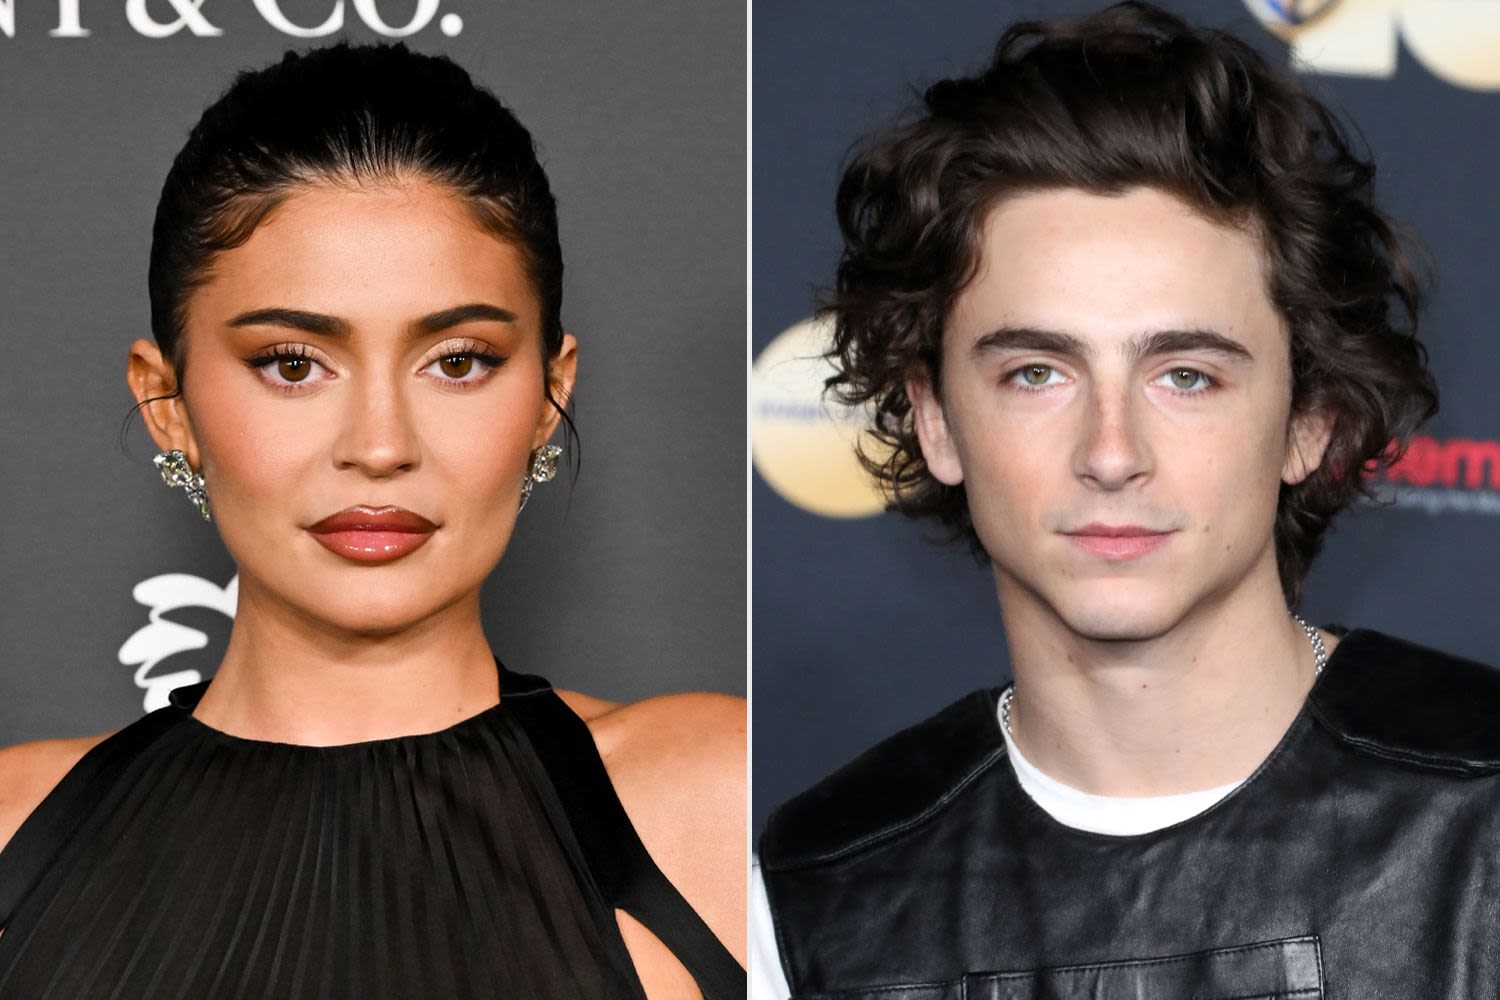 Kylie Jenner and Timothée Chalamet Still Going Strong After NYC Double Date: Sources